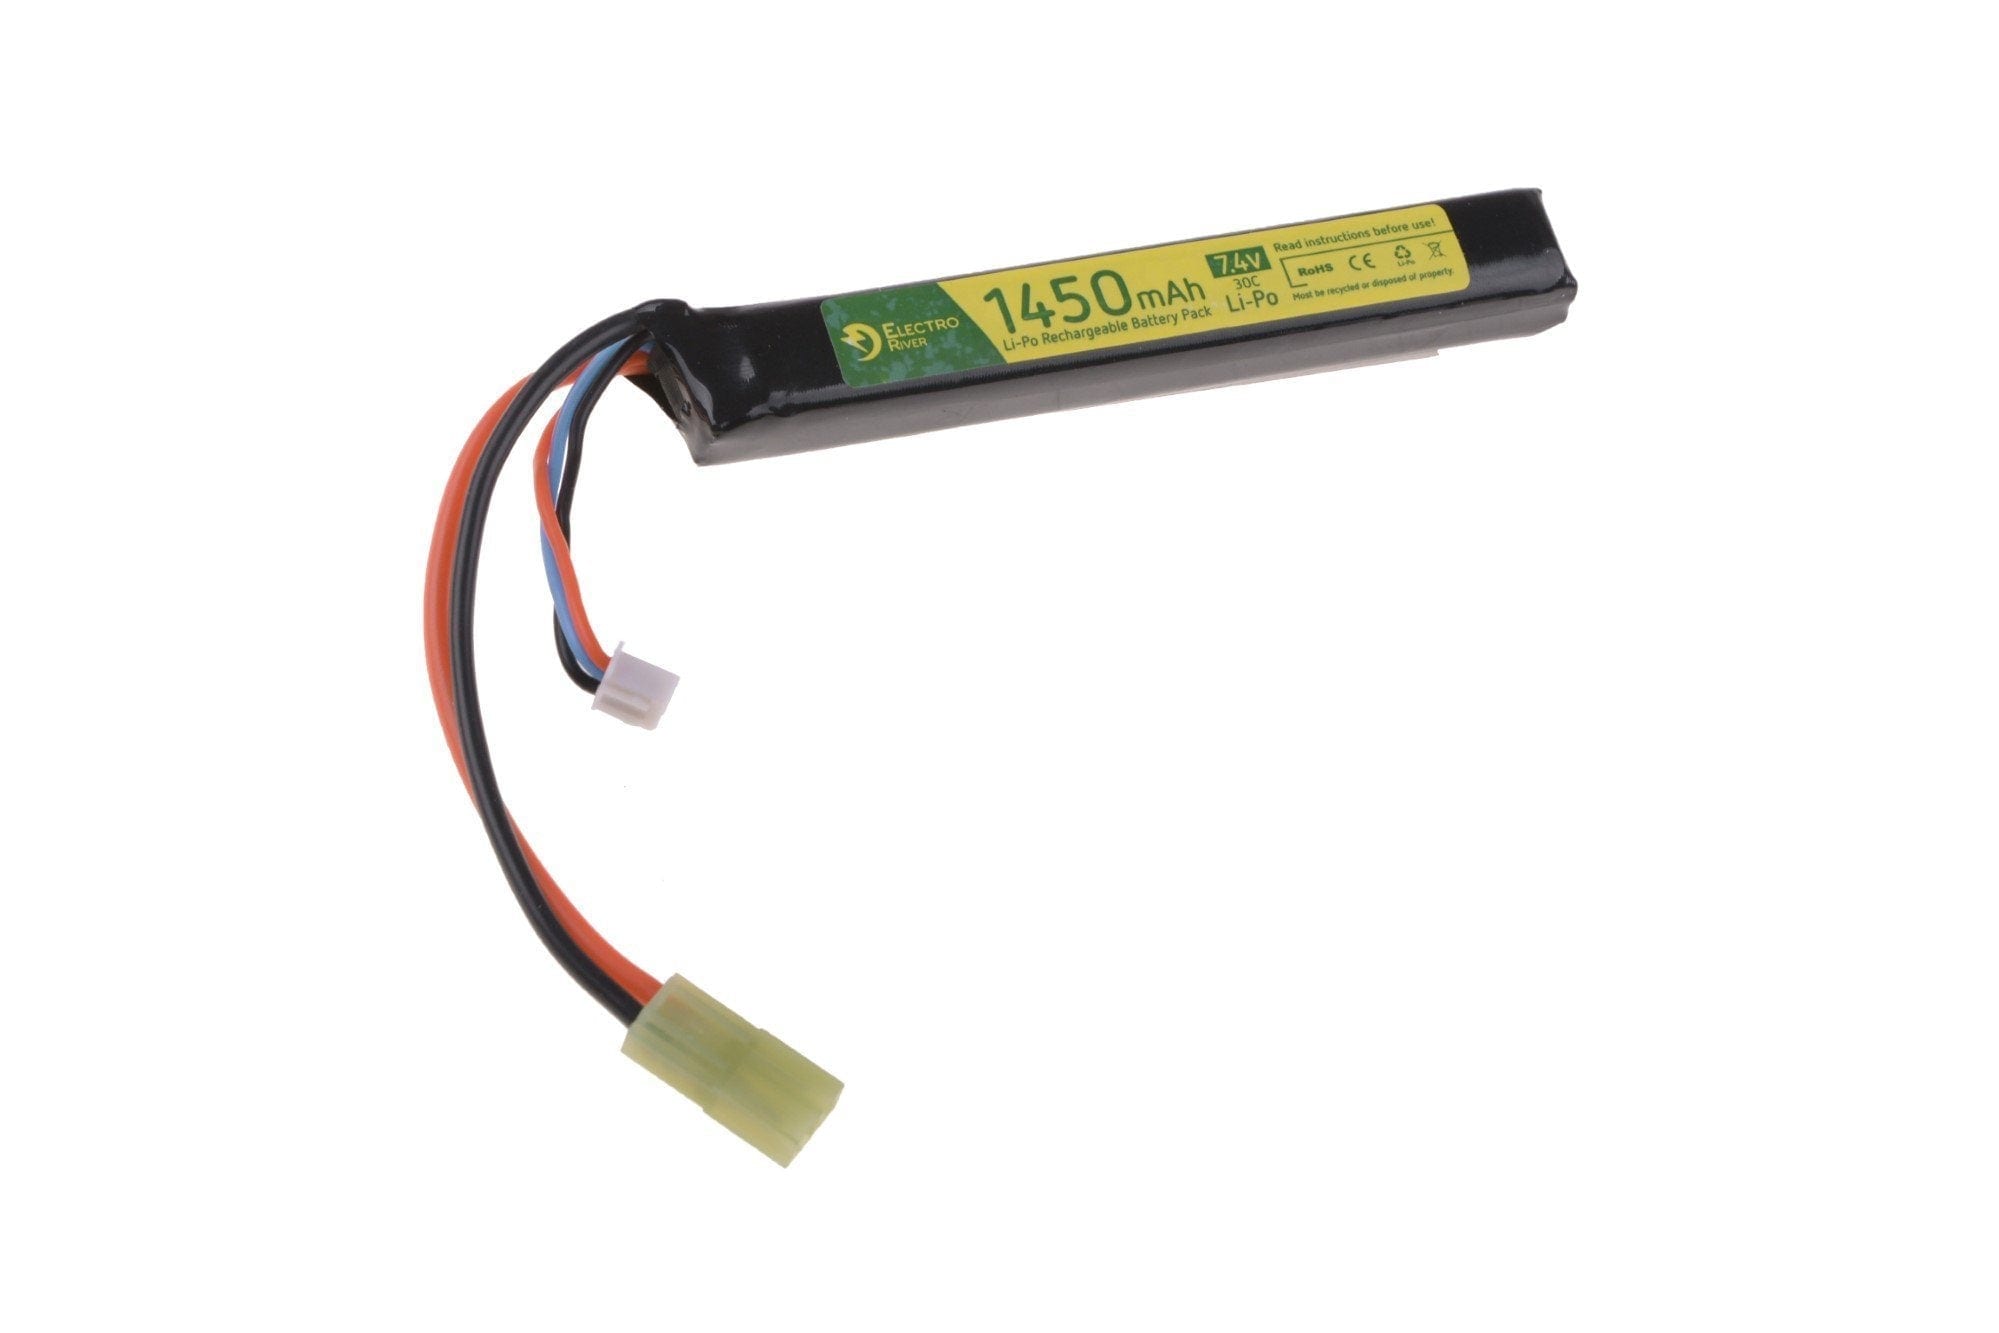 LiPo 7.4V 1450mAh 30C Battery by Electro River on Airsoft Mania Europe